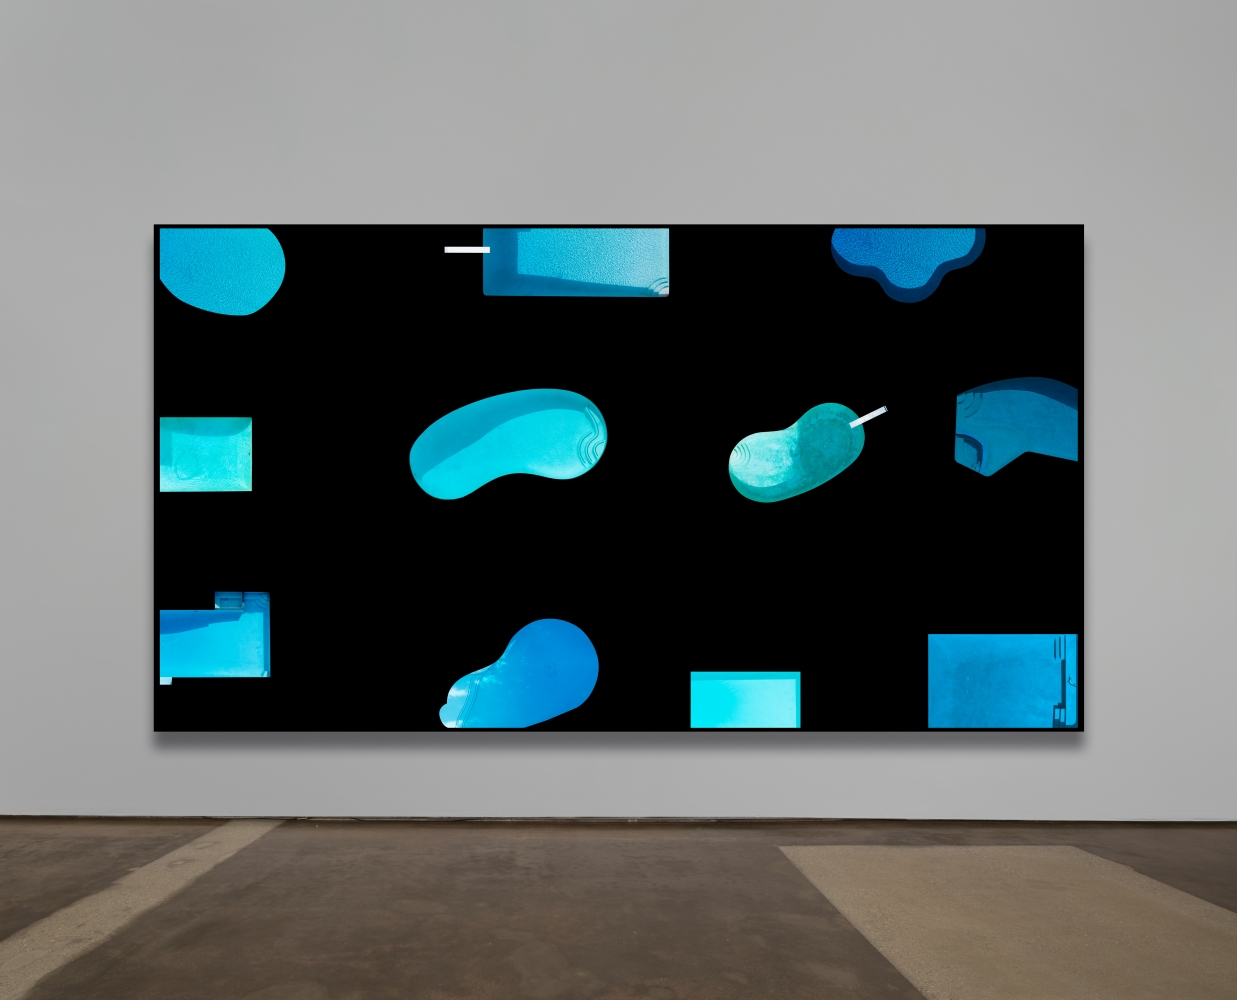 Doug Aitken

Futures Past (aerial pools)

2019

Chromogenic transparency on acrylic in aluminum lightbox with LEDs

67 3/4 x 124 1/2 x 7 1/8 inches (172.1 x 316.2 x 18.1 cm)

Edition&amp;nbsp;of 4, with 2 AP

DA 631

&amp;nbsp;

INQUIRE